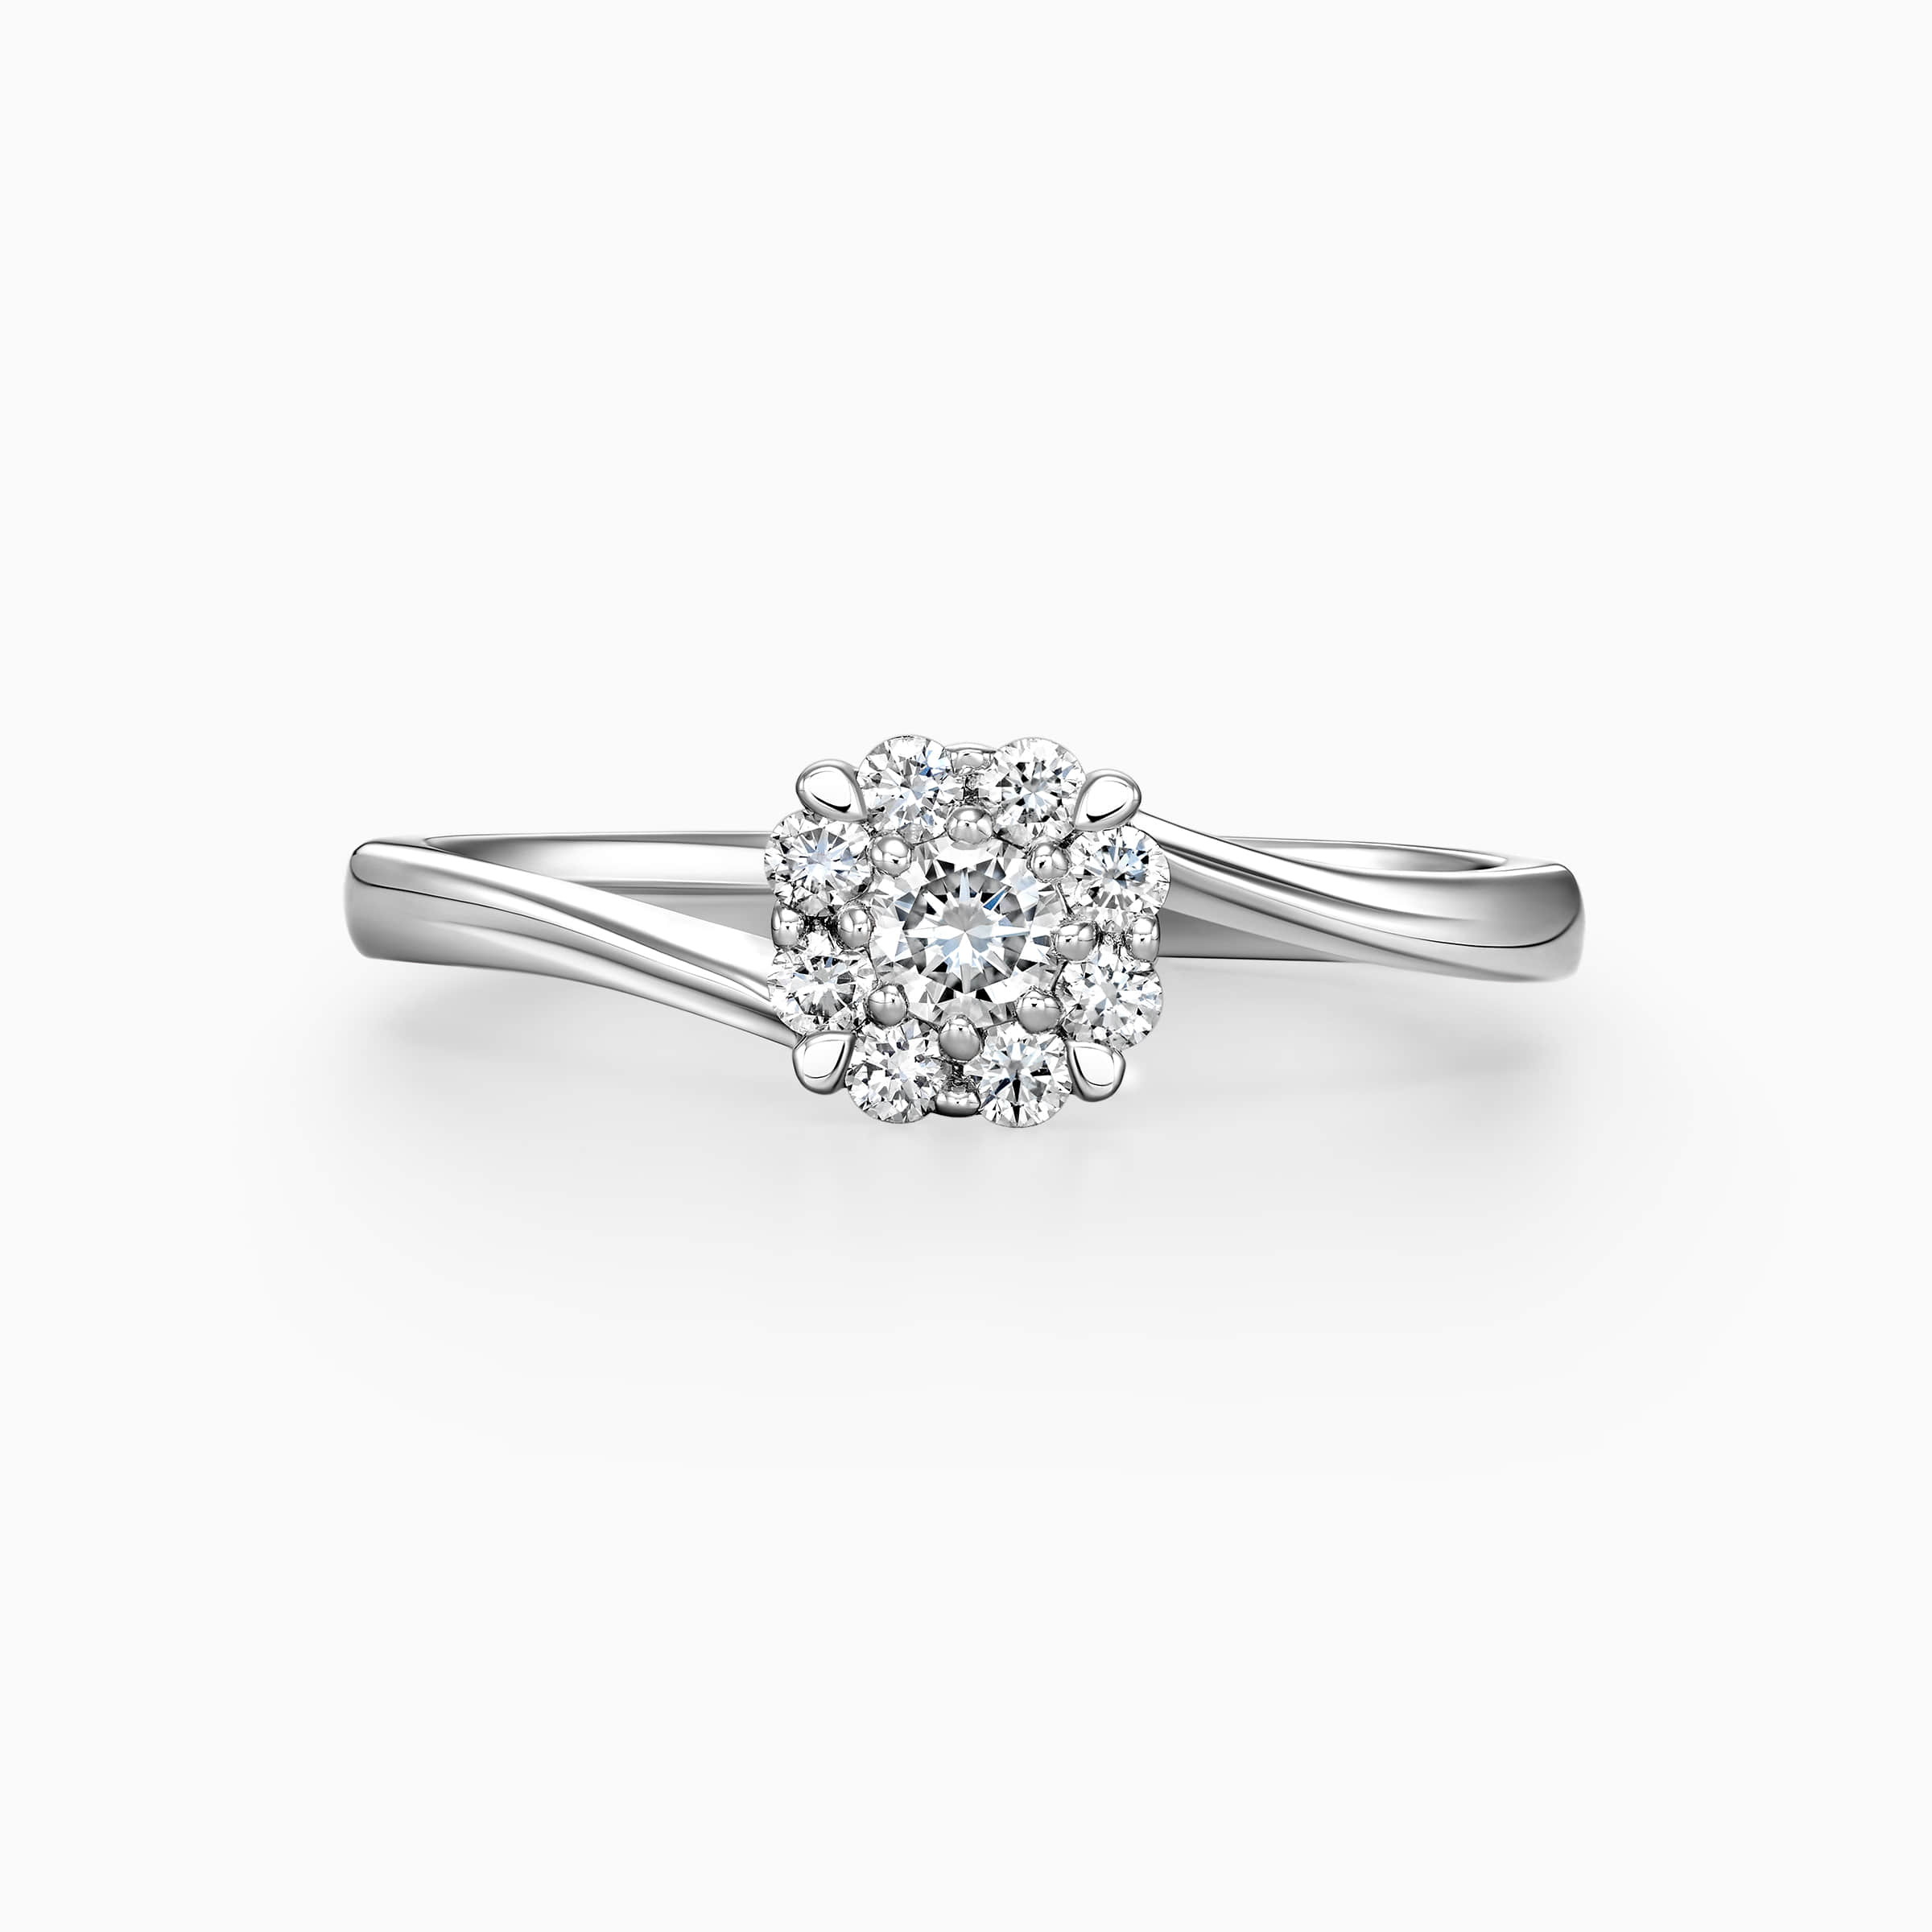 Darry Ring single halo engagement ring